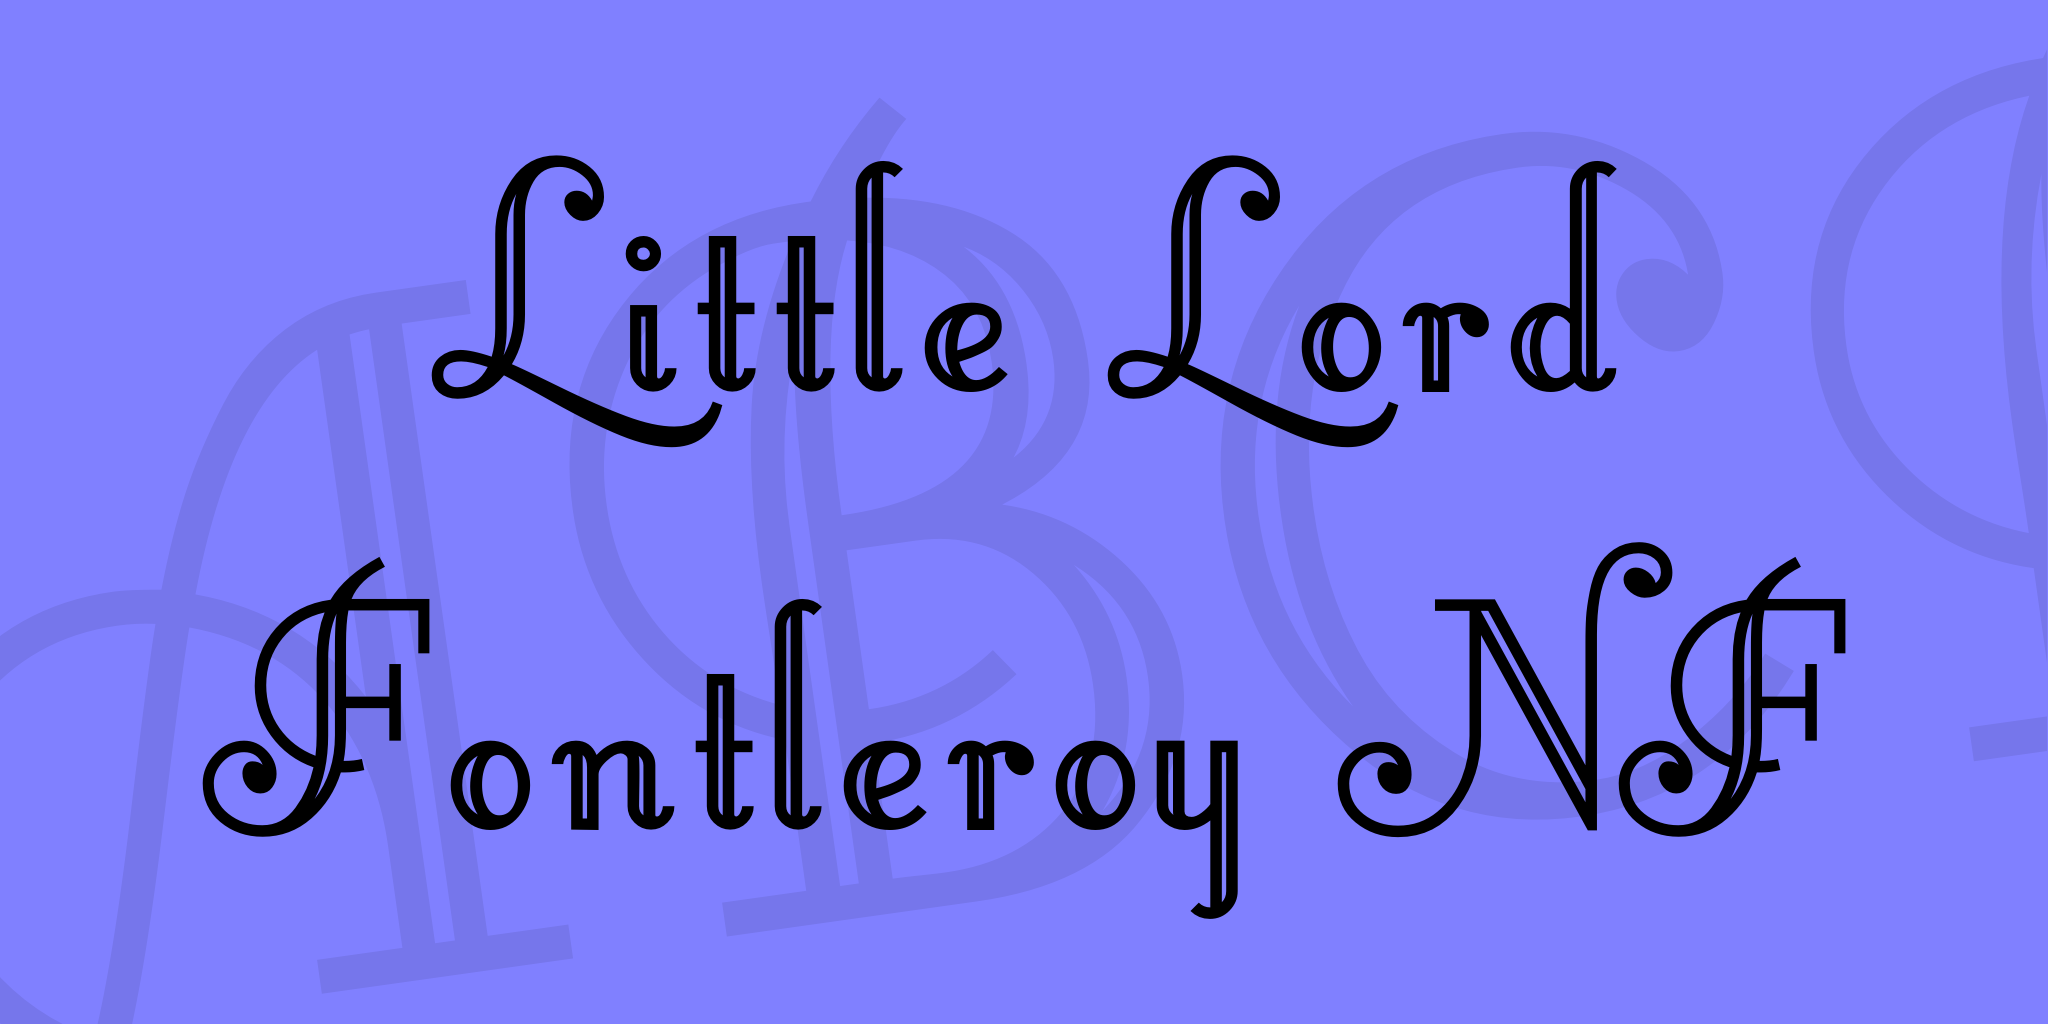 Little Lordleroy Nf